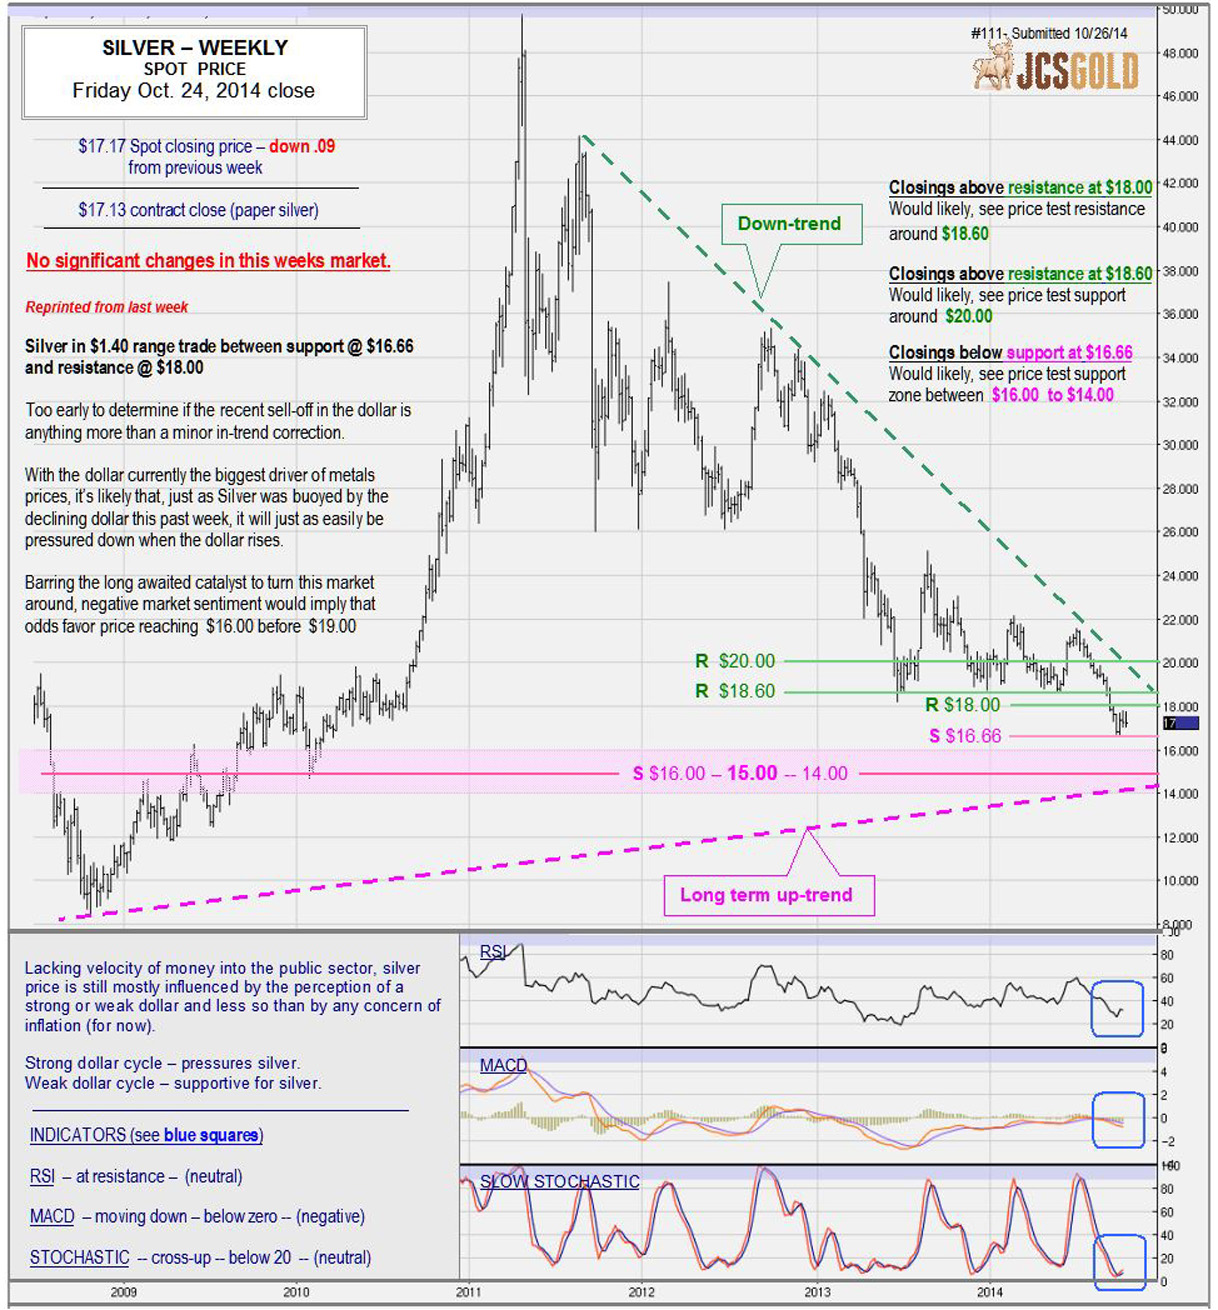 Oct. 24, 2014 chart & commentary